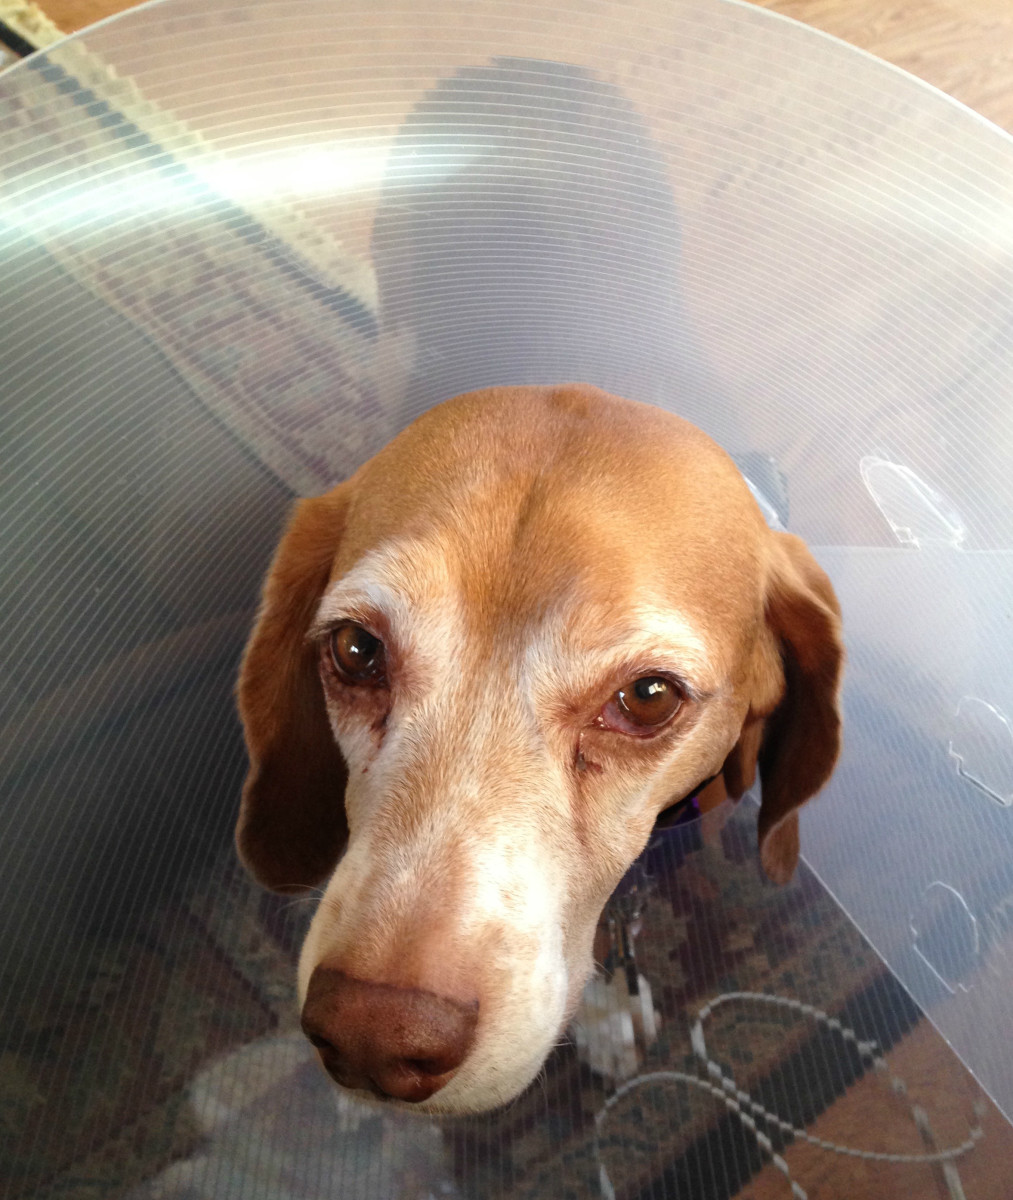 How To Care For Dogs After Spaying Surgery - Pethelpful